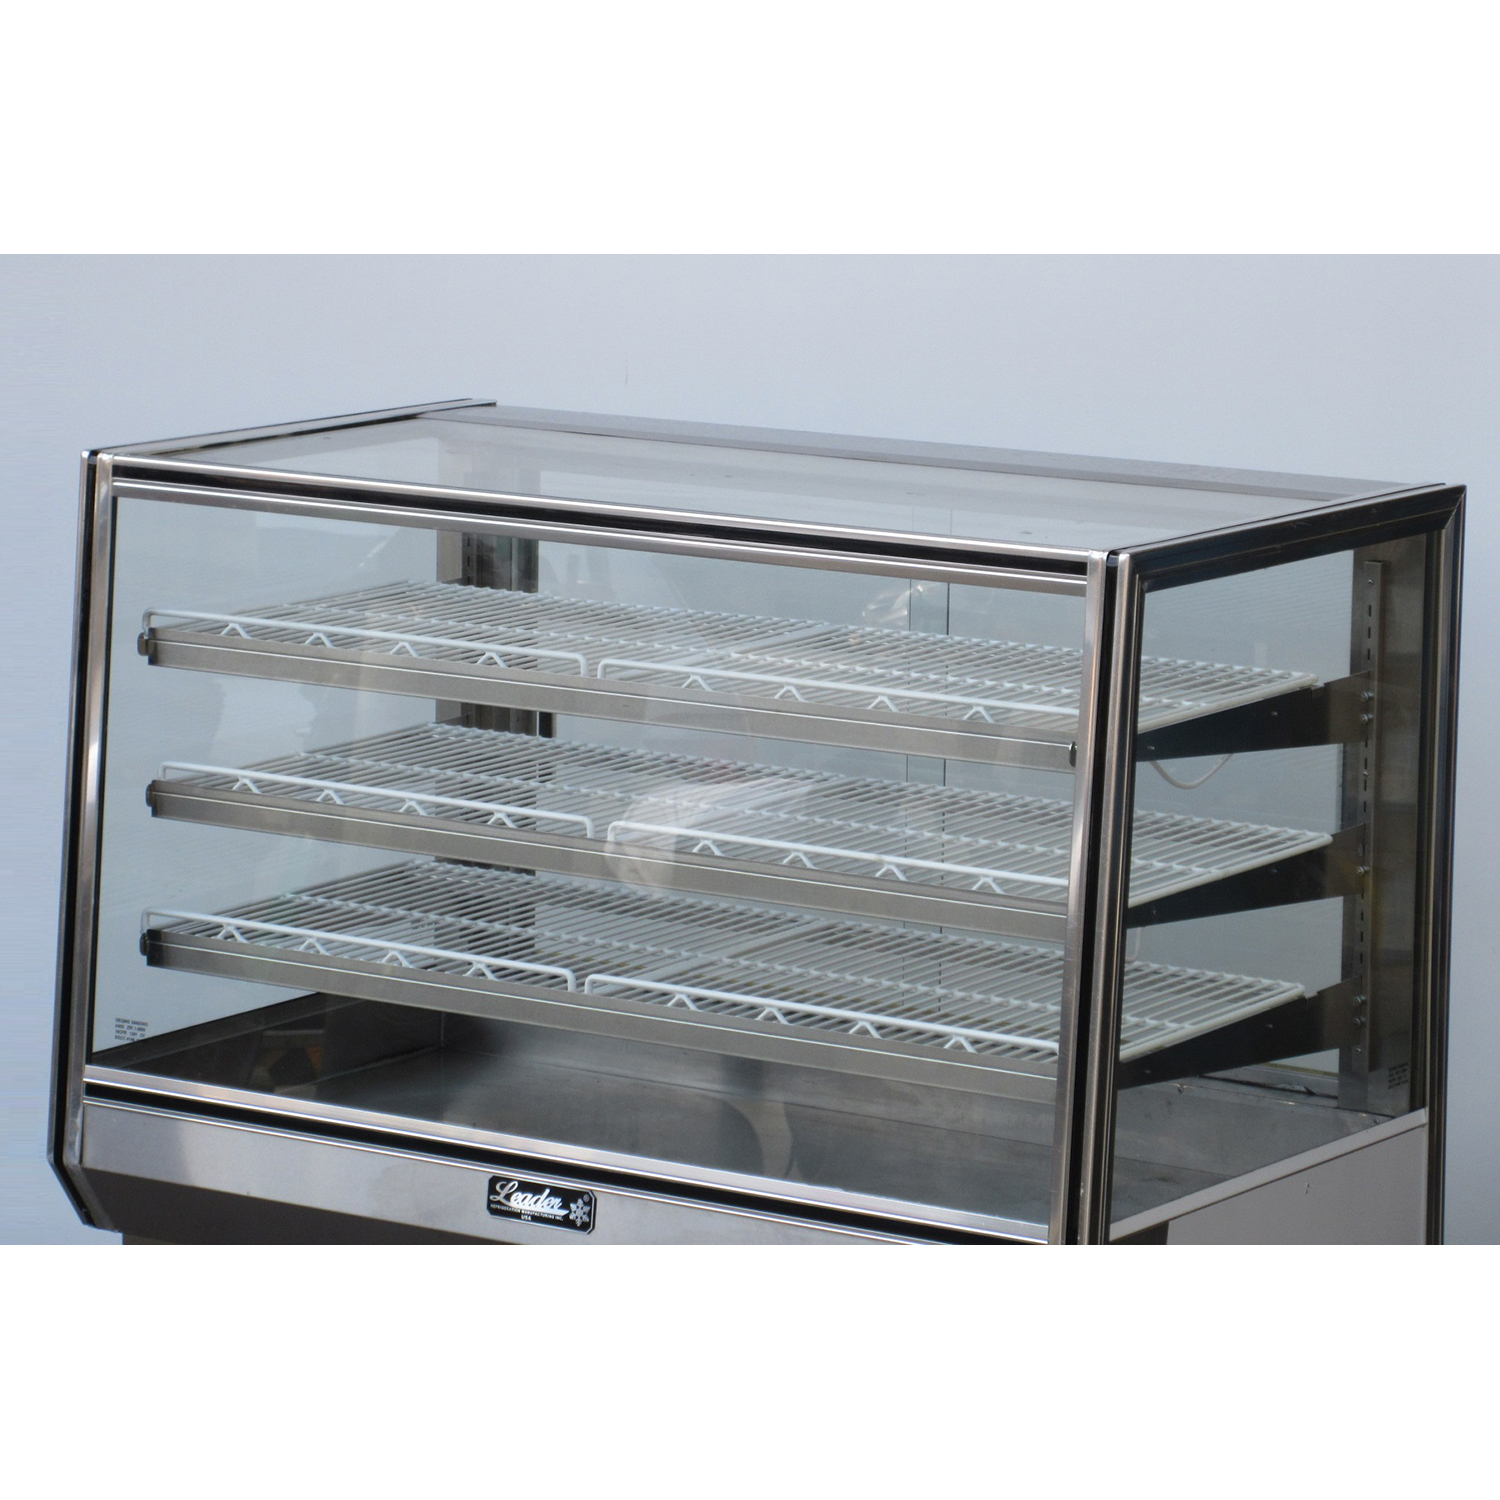 Leader HBK57D Dry Bakery Case, Used Excellent Condition image 1